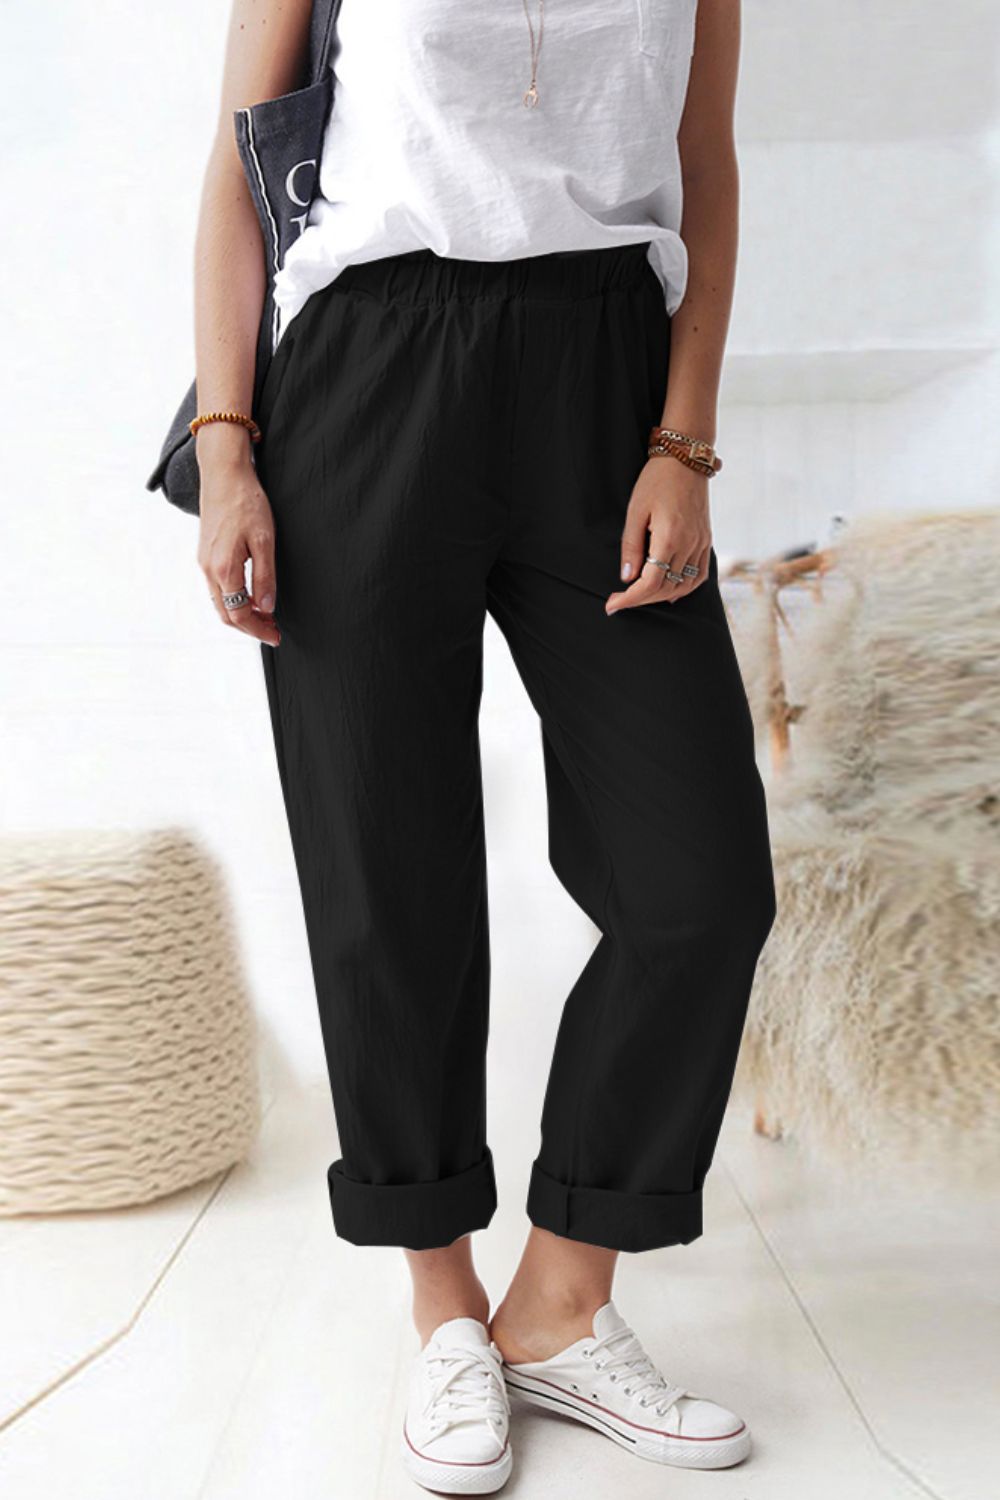 We're So Brooklyn Paperbag Waist Pull-On Pants with Pockets